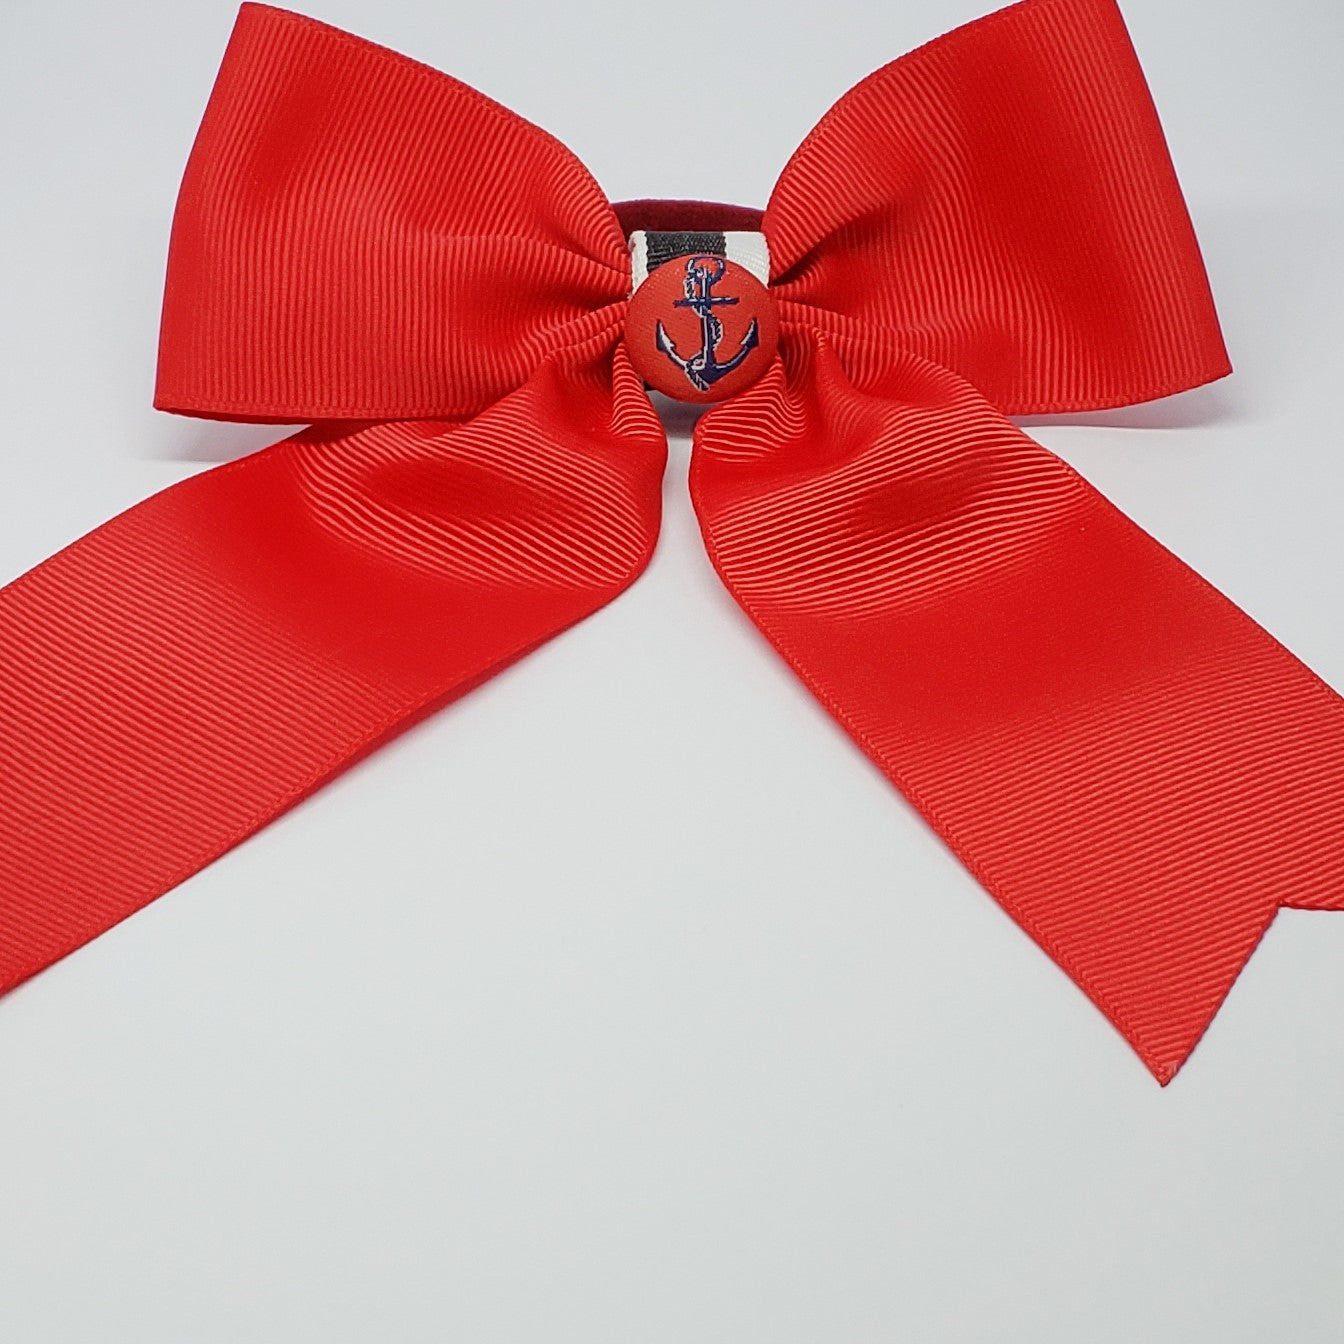 Cassidy-Dior Cheer Style Bow in Red, Navy, Black & White - Houzz of DVA Boutique